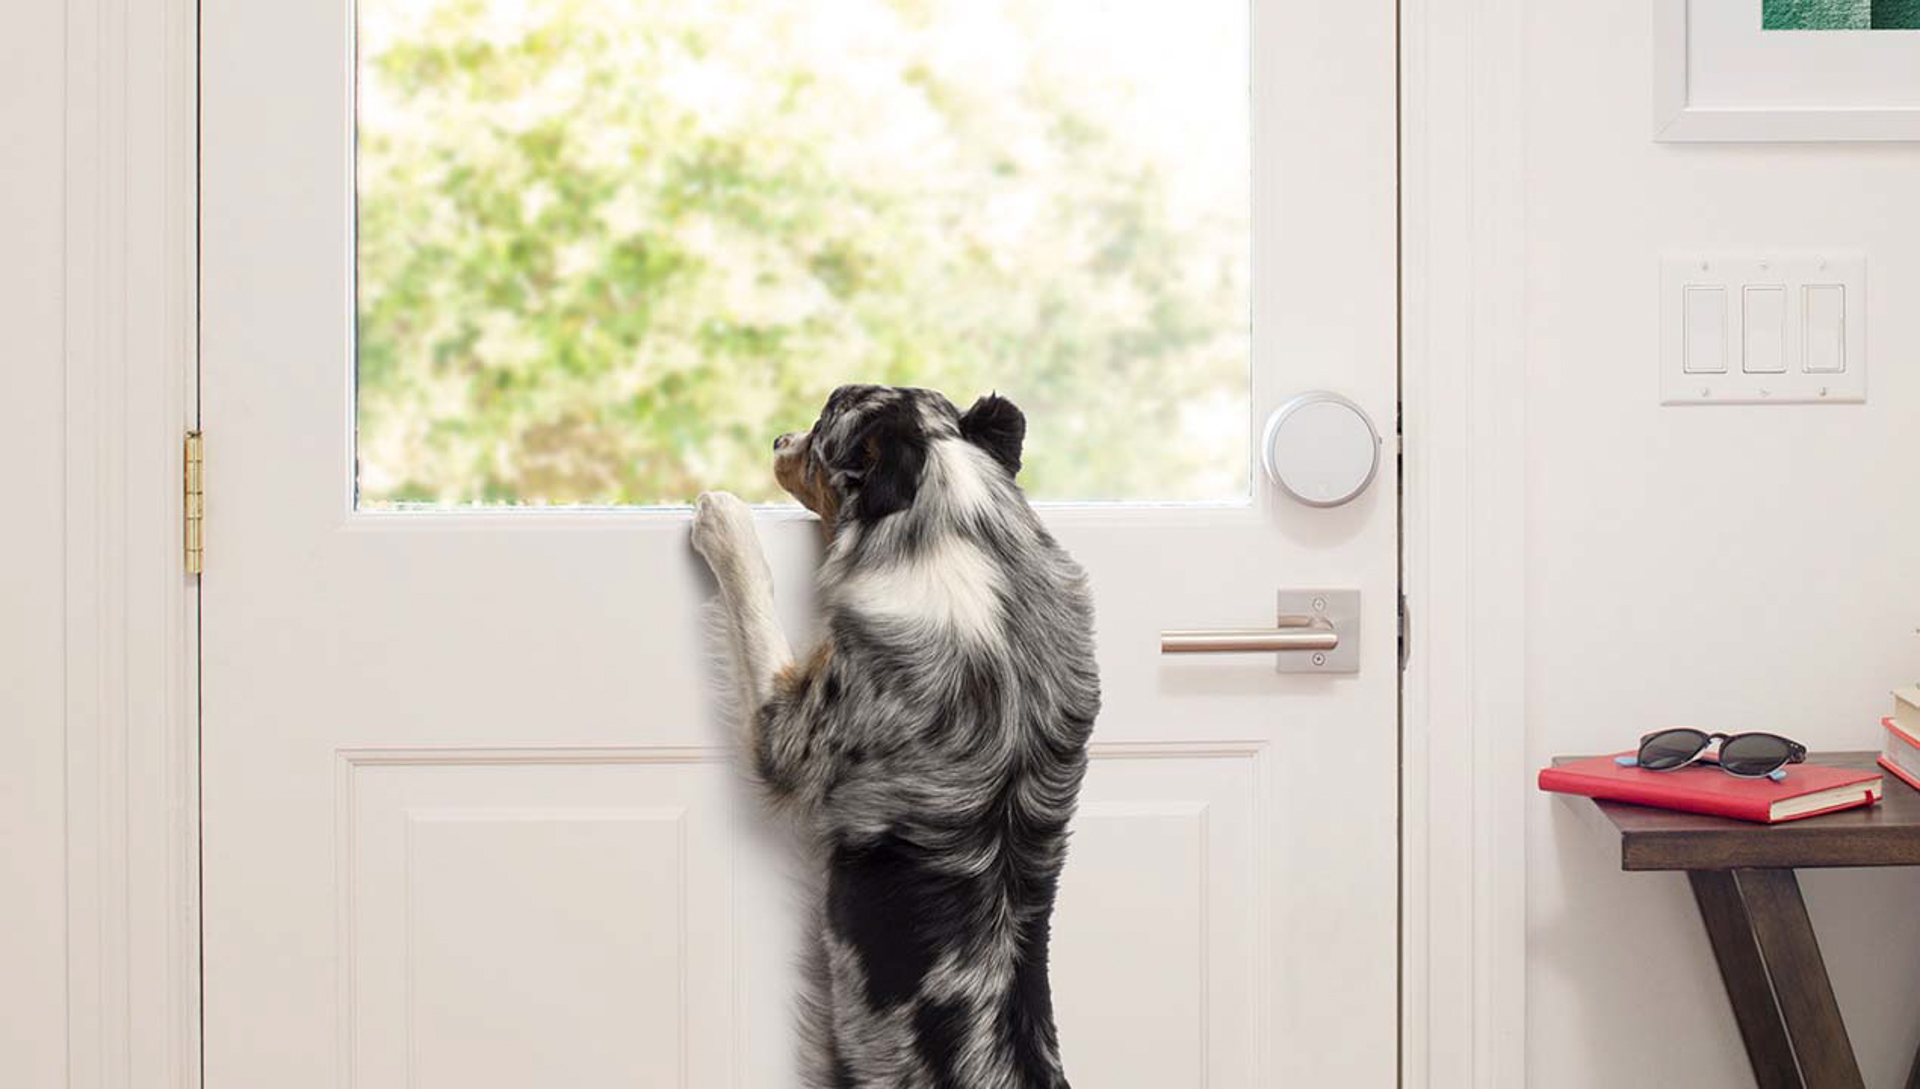 Your pet eagerly awaits a daytime visit. Image: August Home.